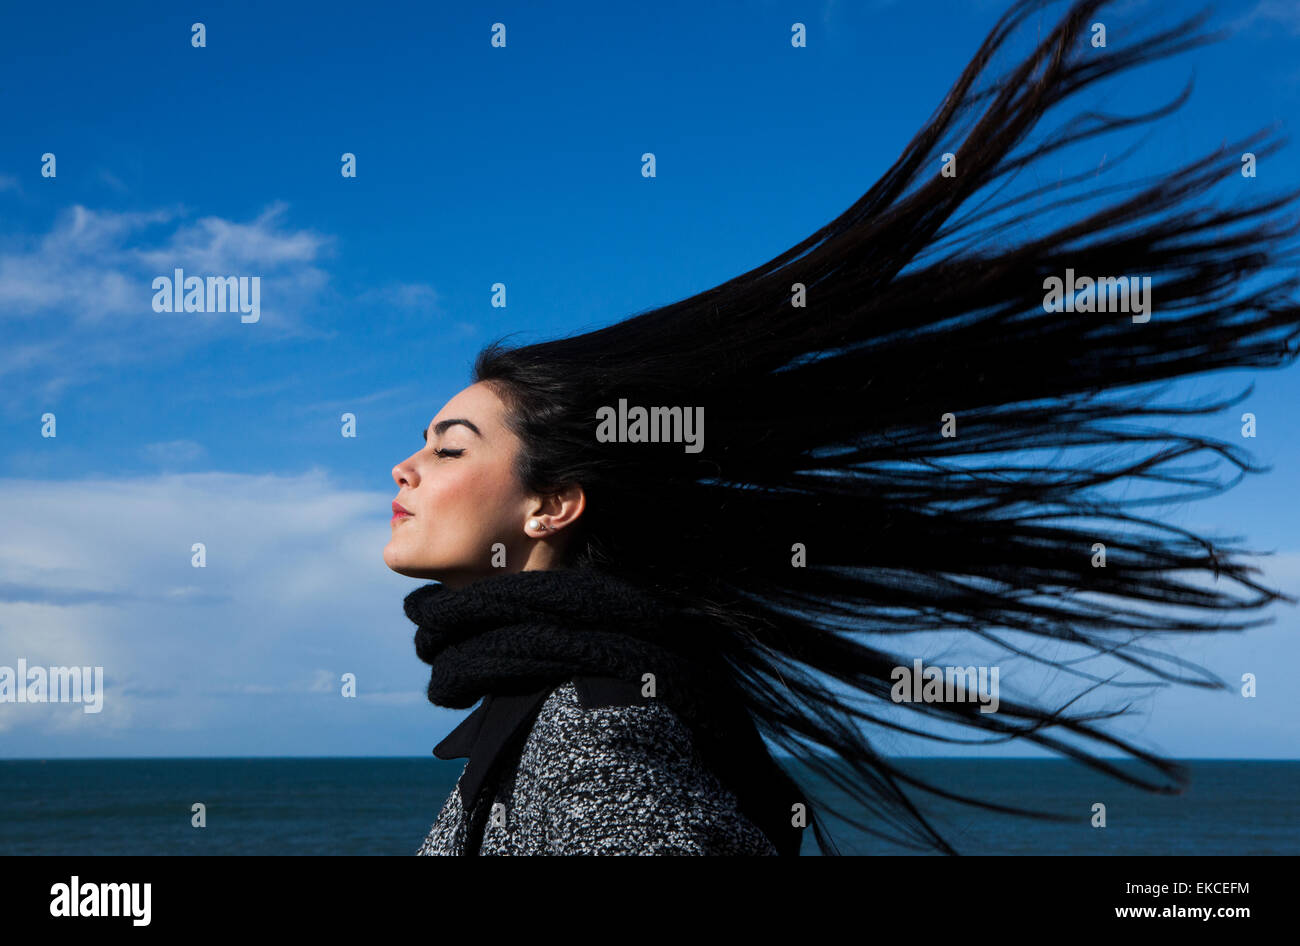 Young woman with hair blowing in the wind Stock Photo